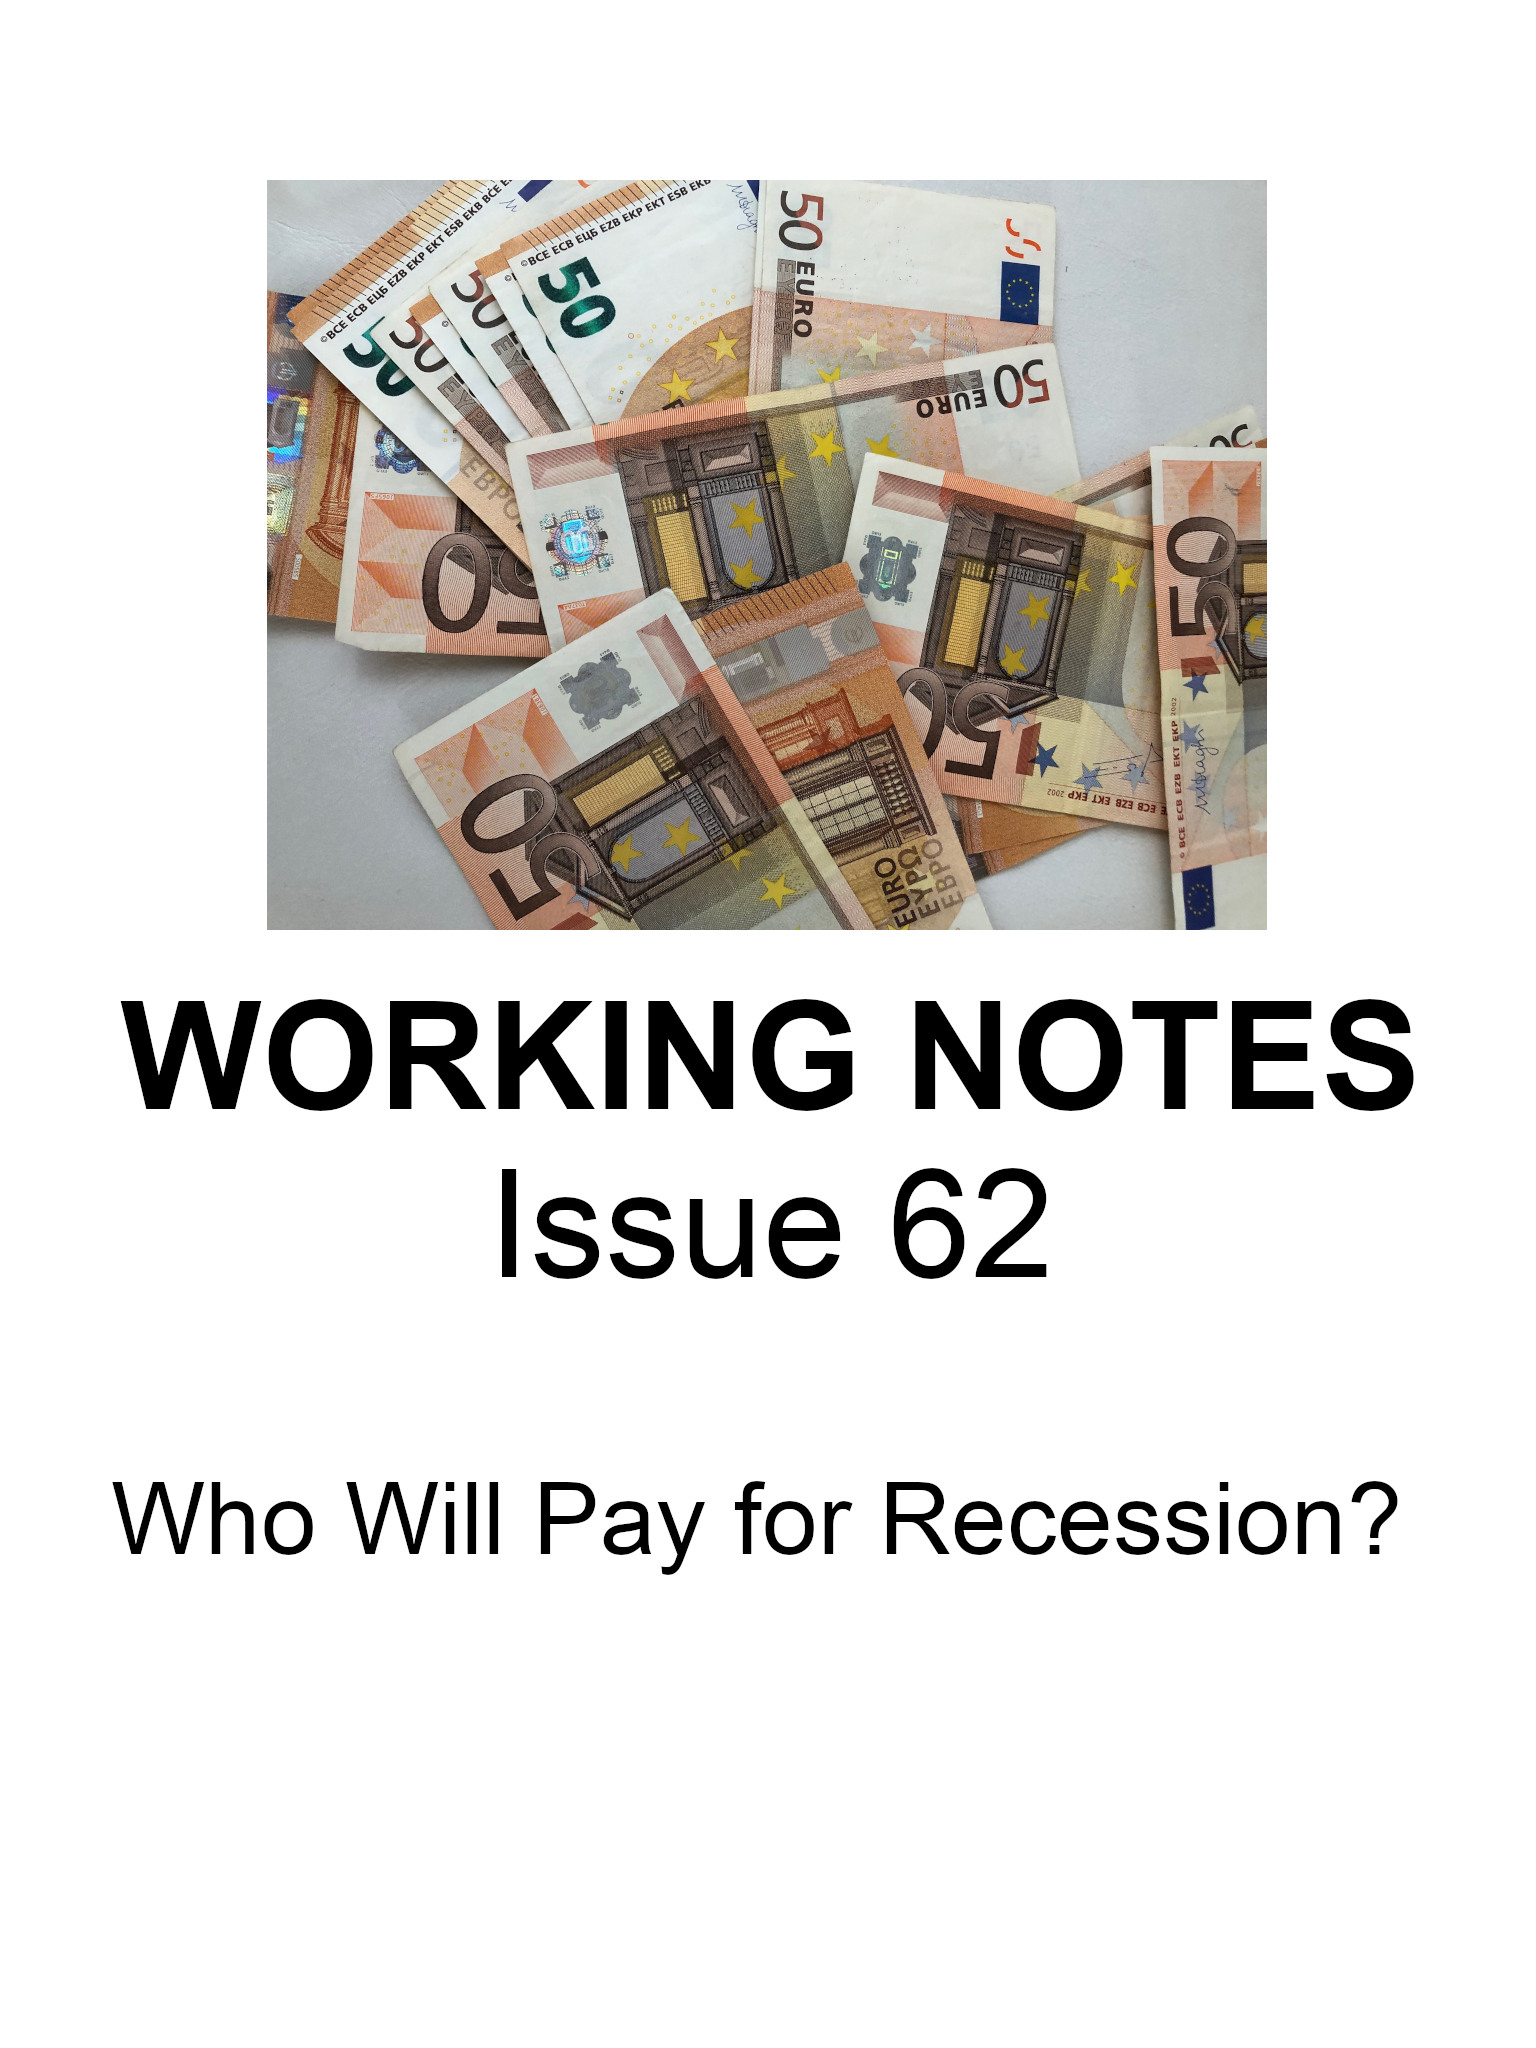 working-notes-issue-62